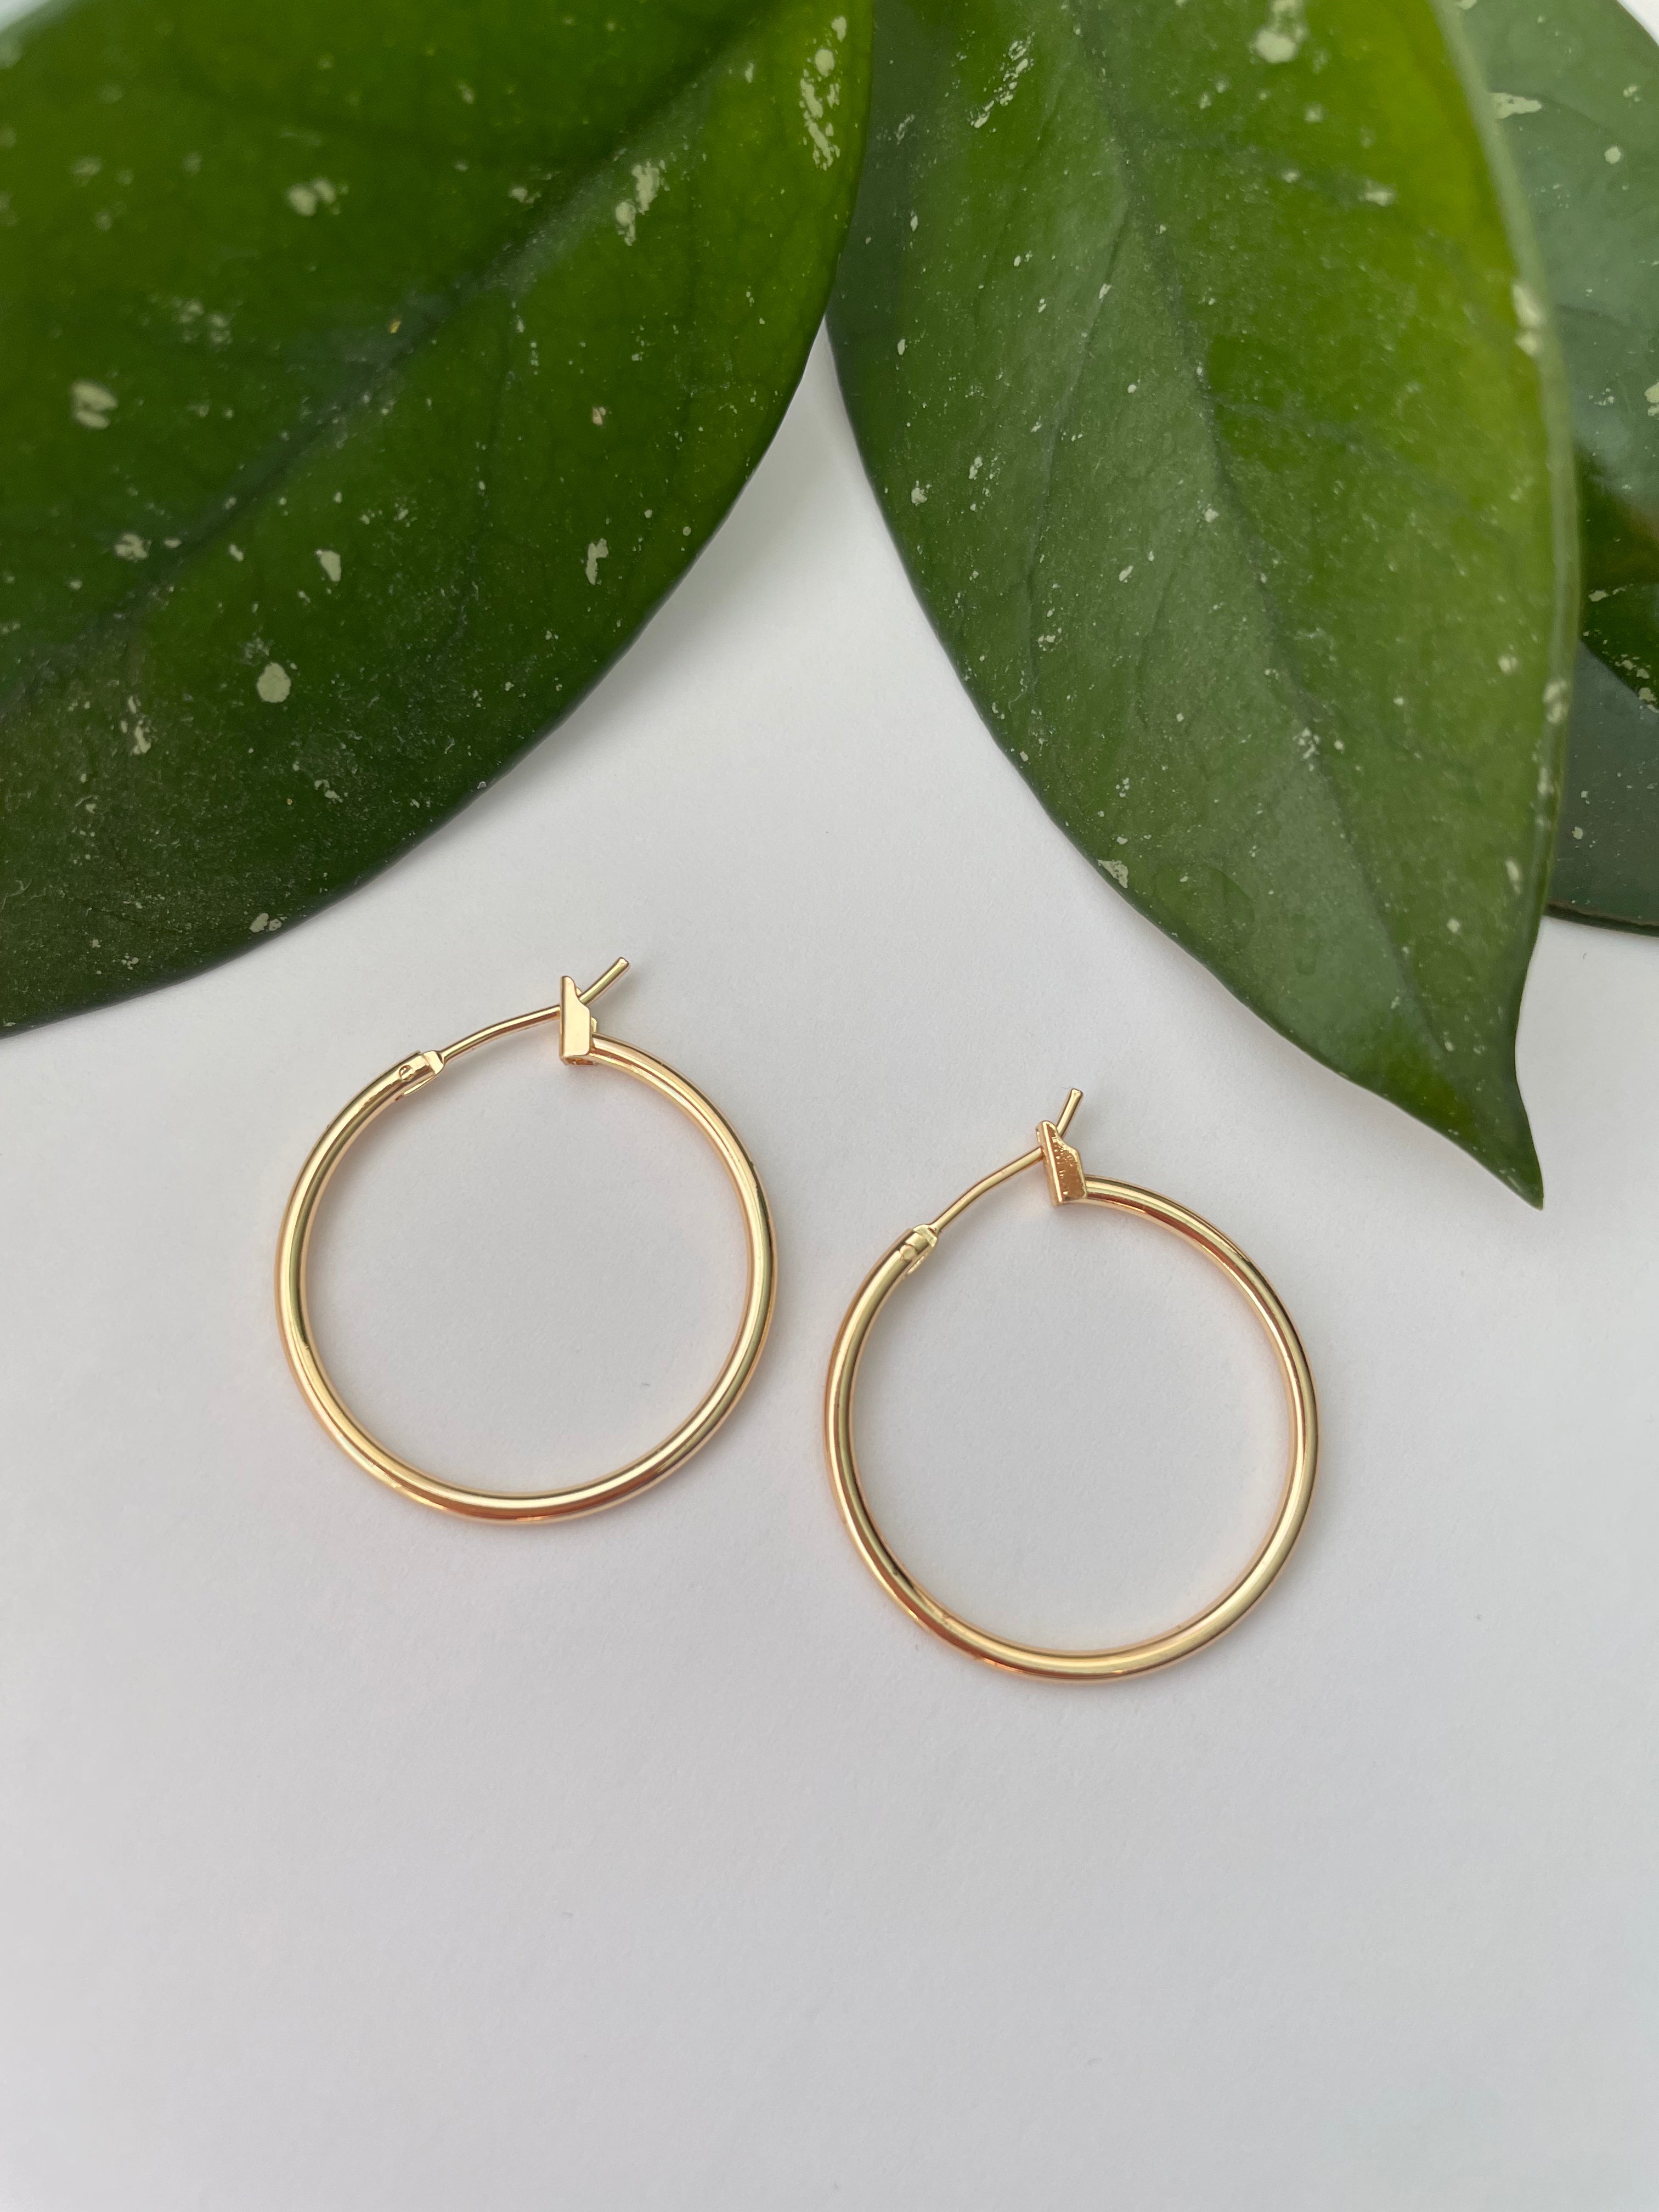 Gold Earrings - Charmed by Chardonnay